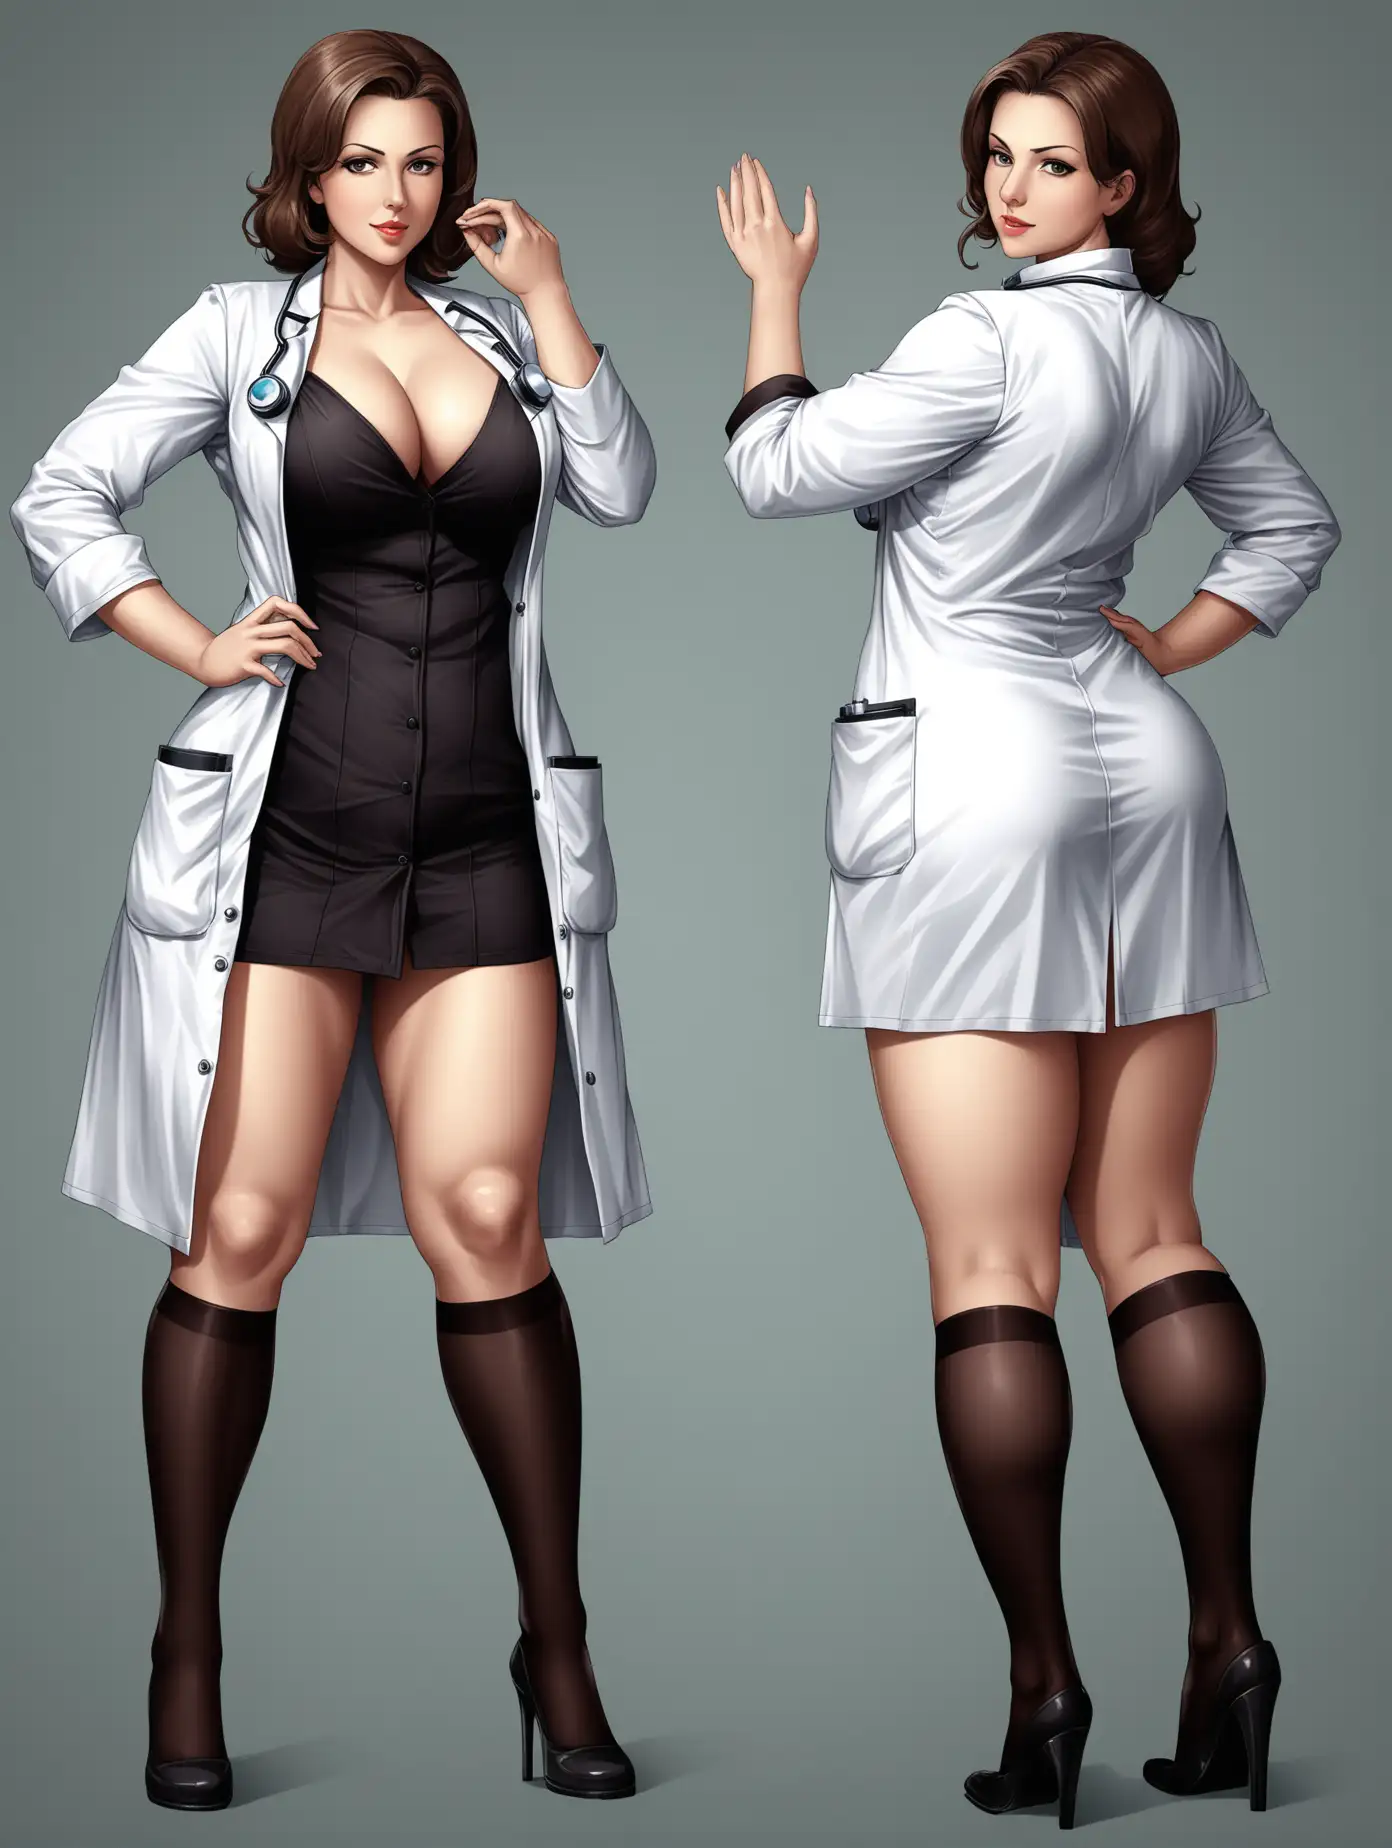 Sensual picture of a attractive woman, age 30, large chest, large butt, in scientist outfit, 2 poses, full body